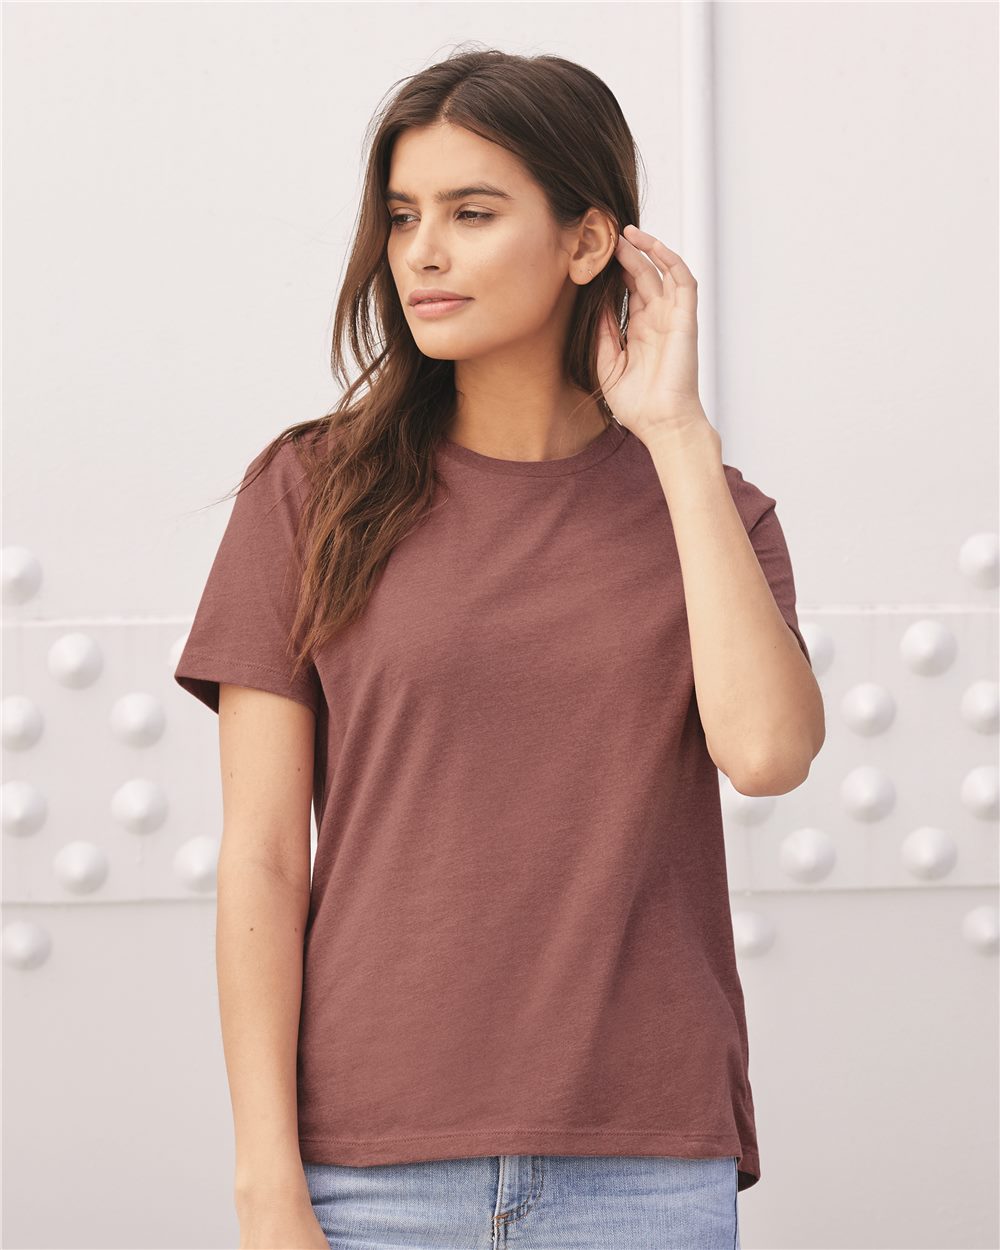 BC6400 - BELLA+CANVAS Women's Relaxed Jersey Short Sleeve Tee